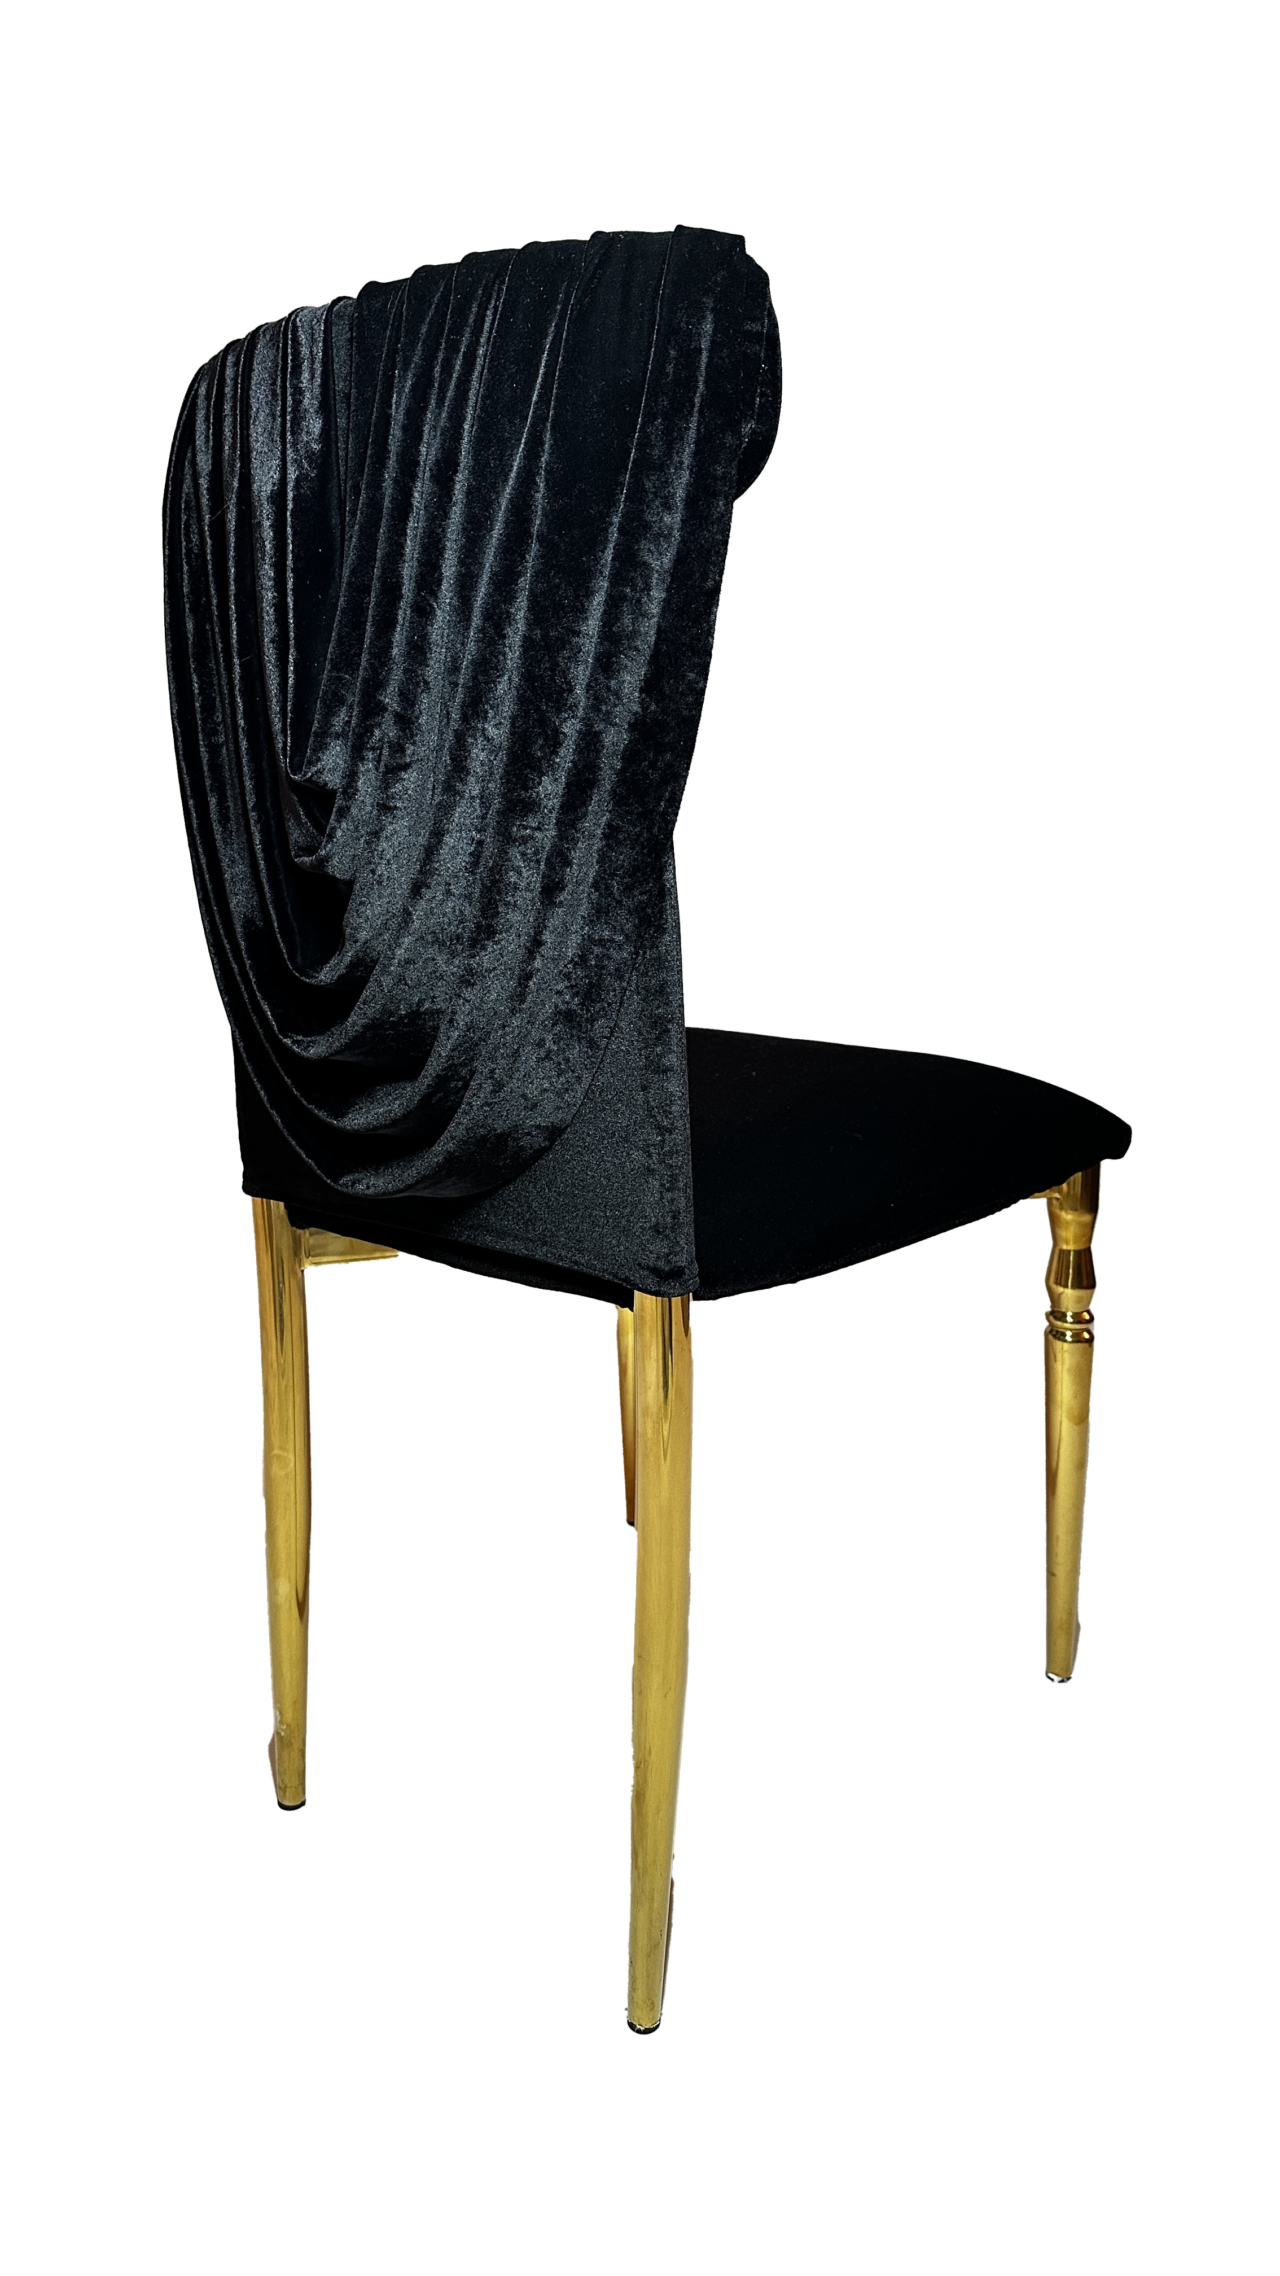 A luxurious black velvet chair with gold-tipped legs, elegantly draped with a plush velvet throw, isolated on a transparent background.